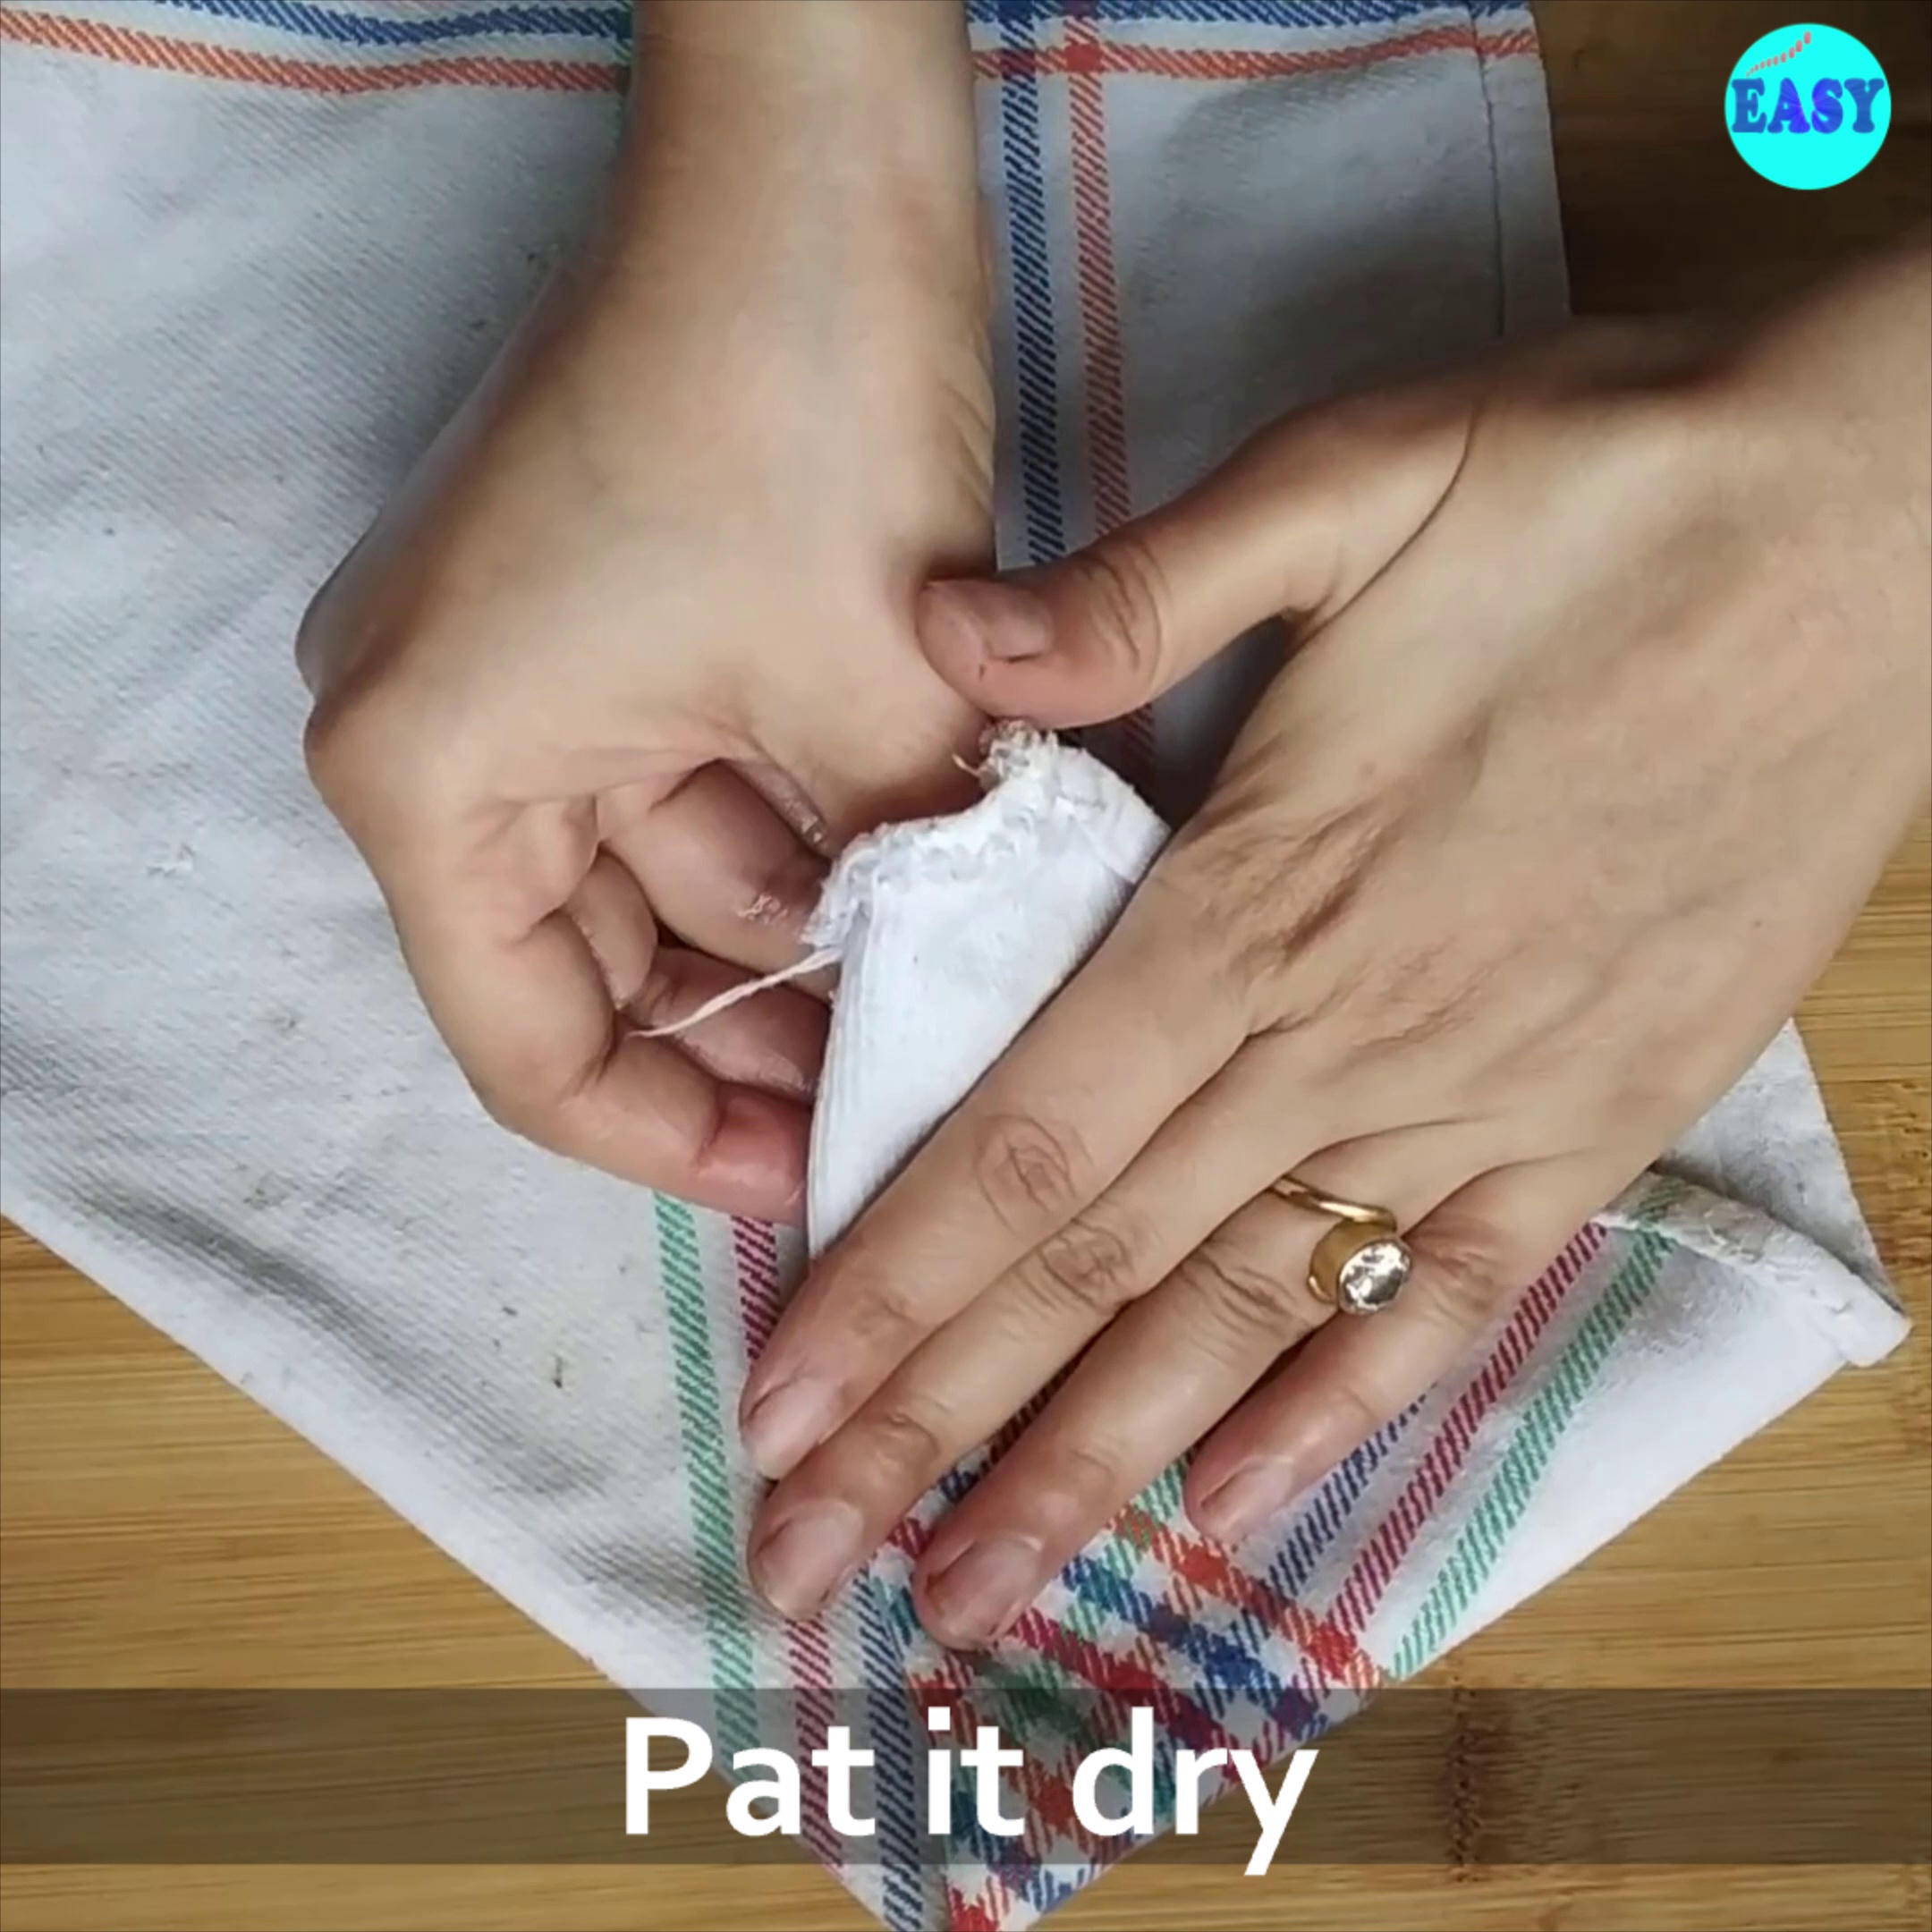 Step 5 - Now remove from water and pat it dry with a kitchen towel. This step will help in making spinach leaves fresh and crisp, so it will be easier to handle.